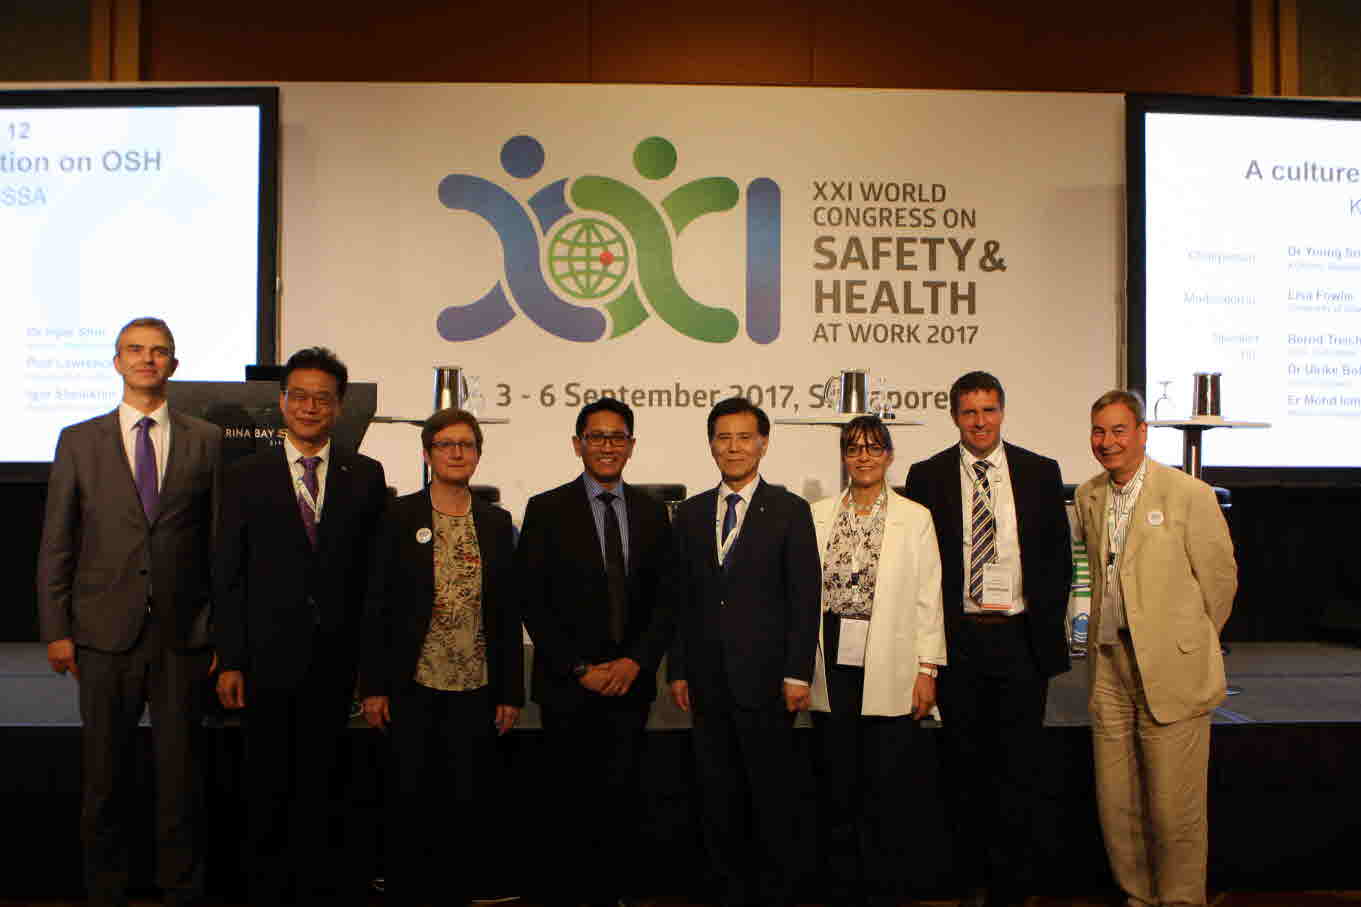 XXI World Congress on Safety and Health